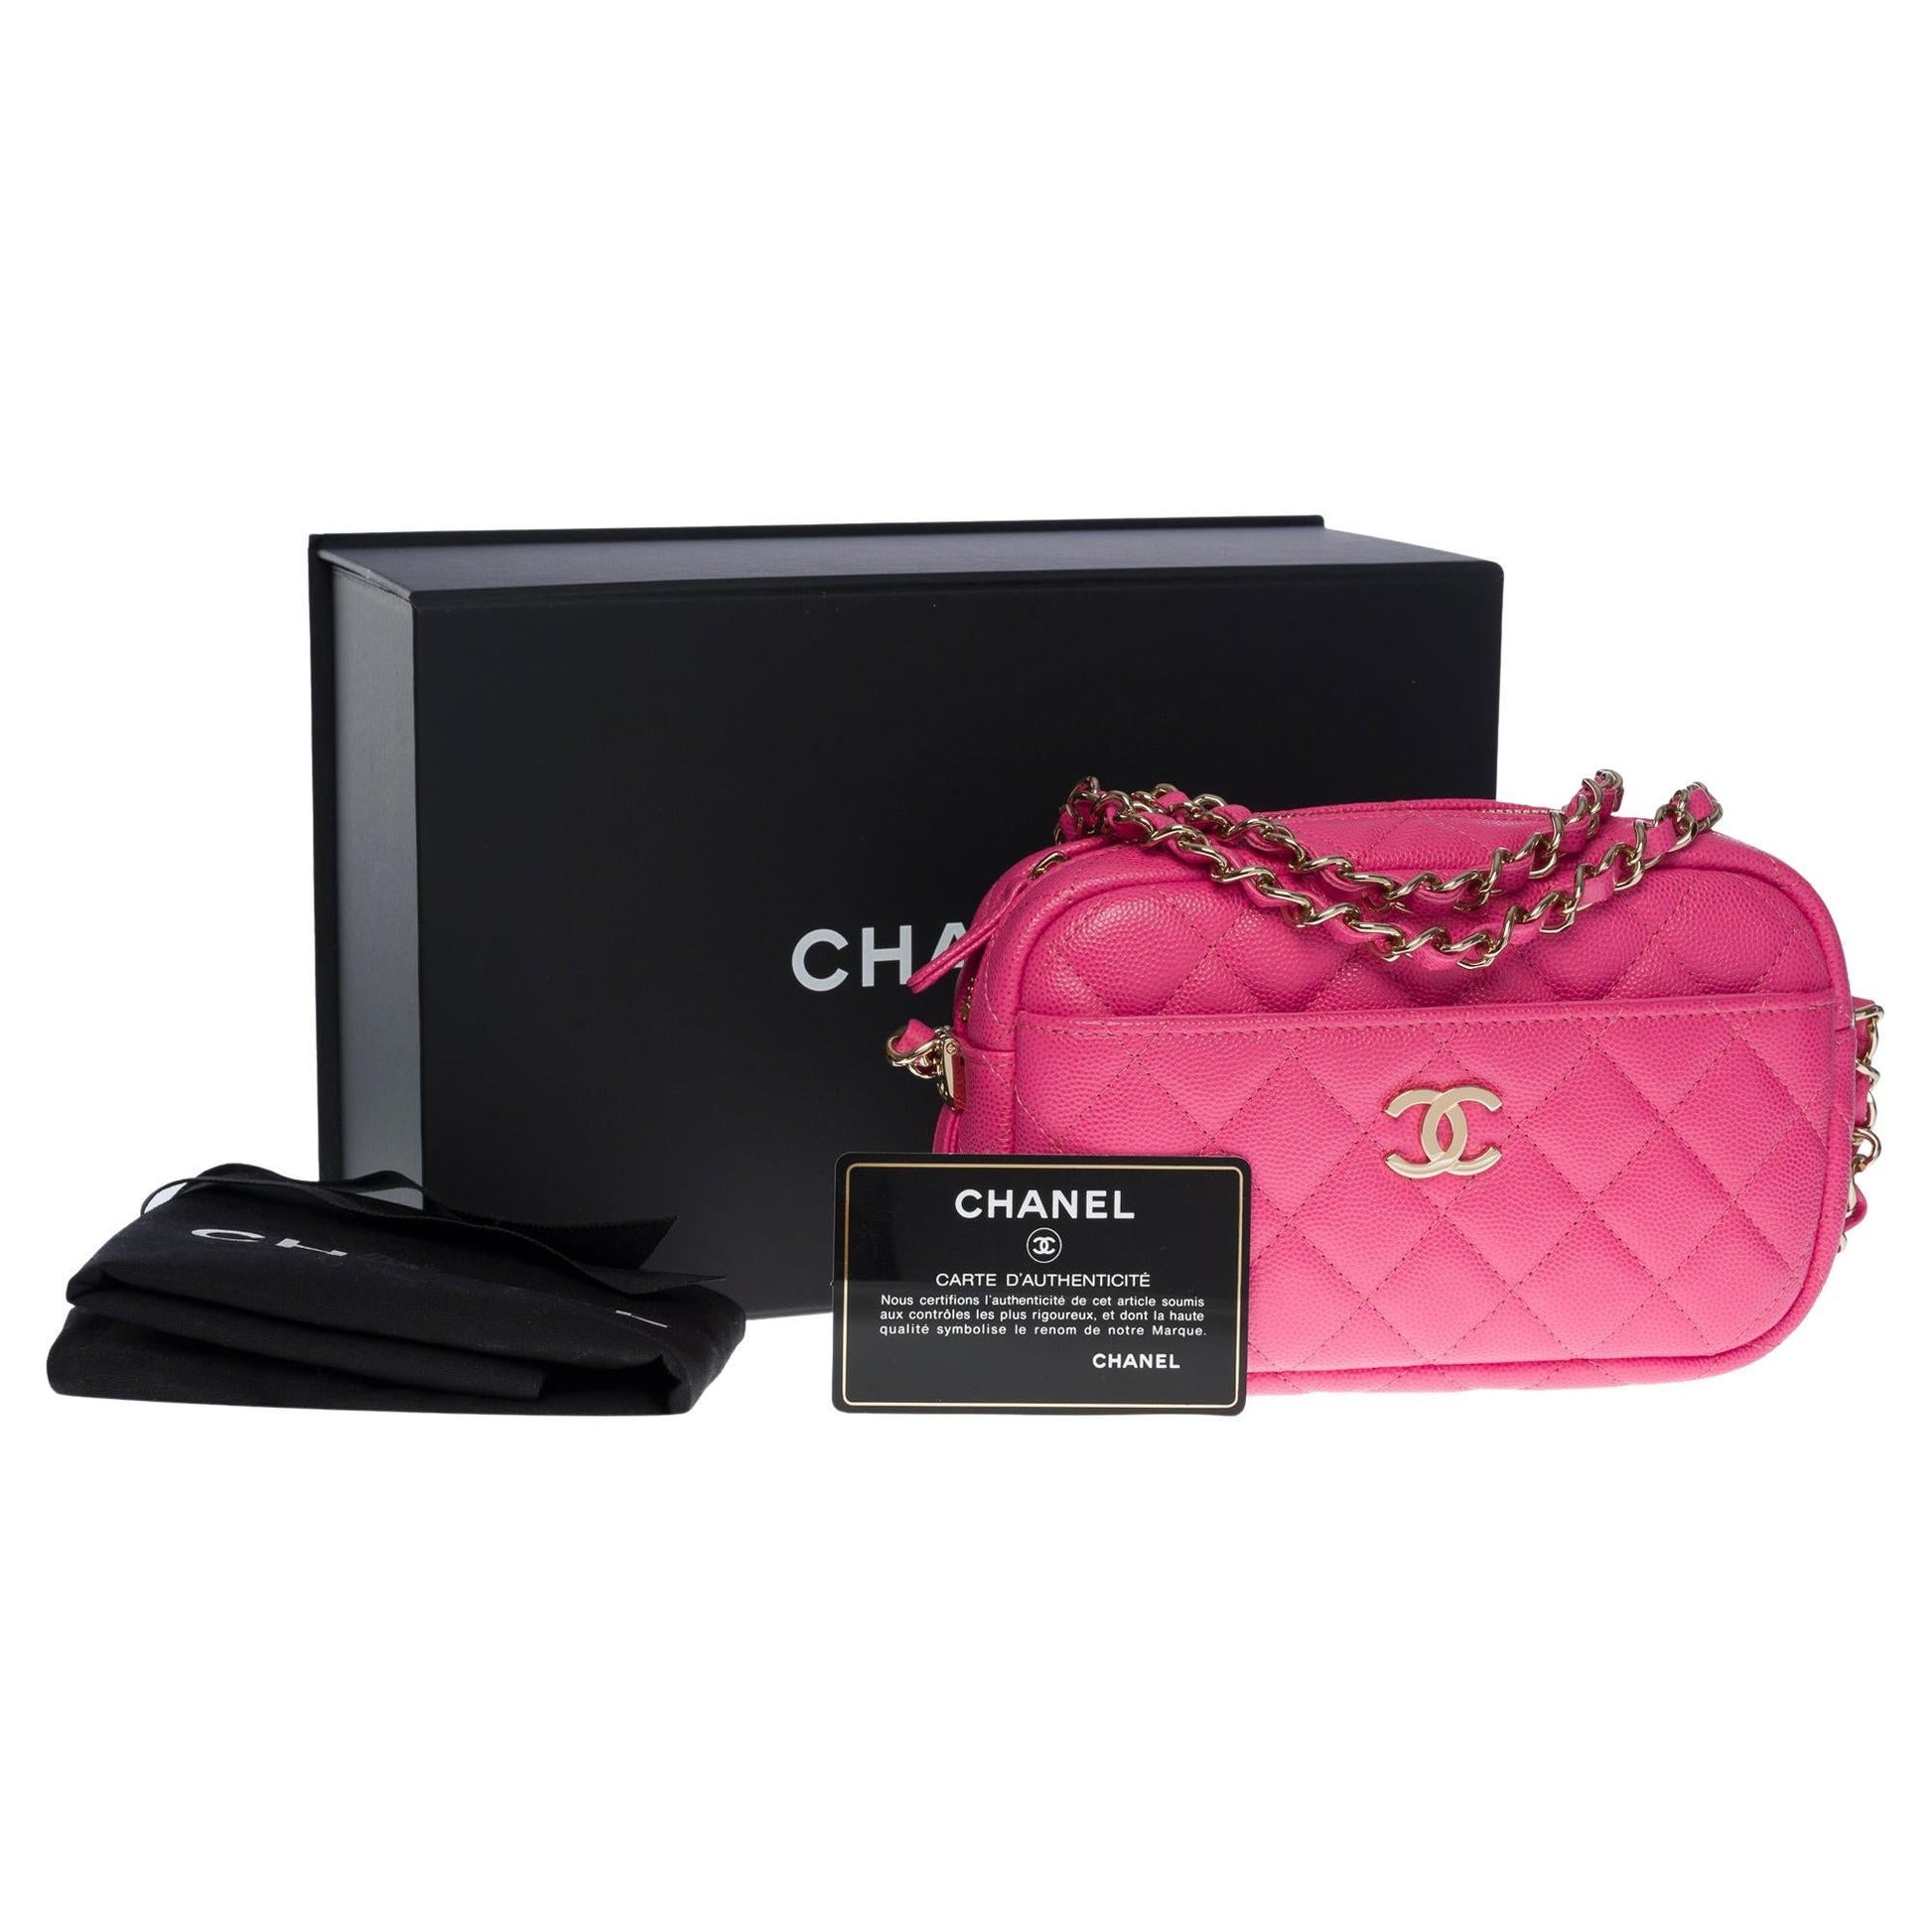 CHANEL New- Amazing Mini Camera shoulder bag in Pink caviar leather, C